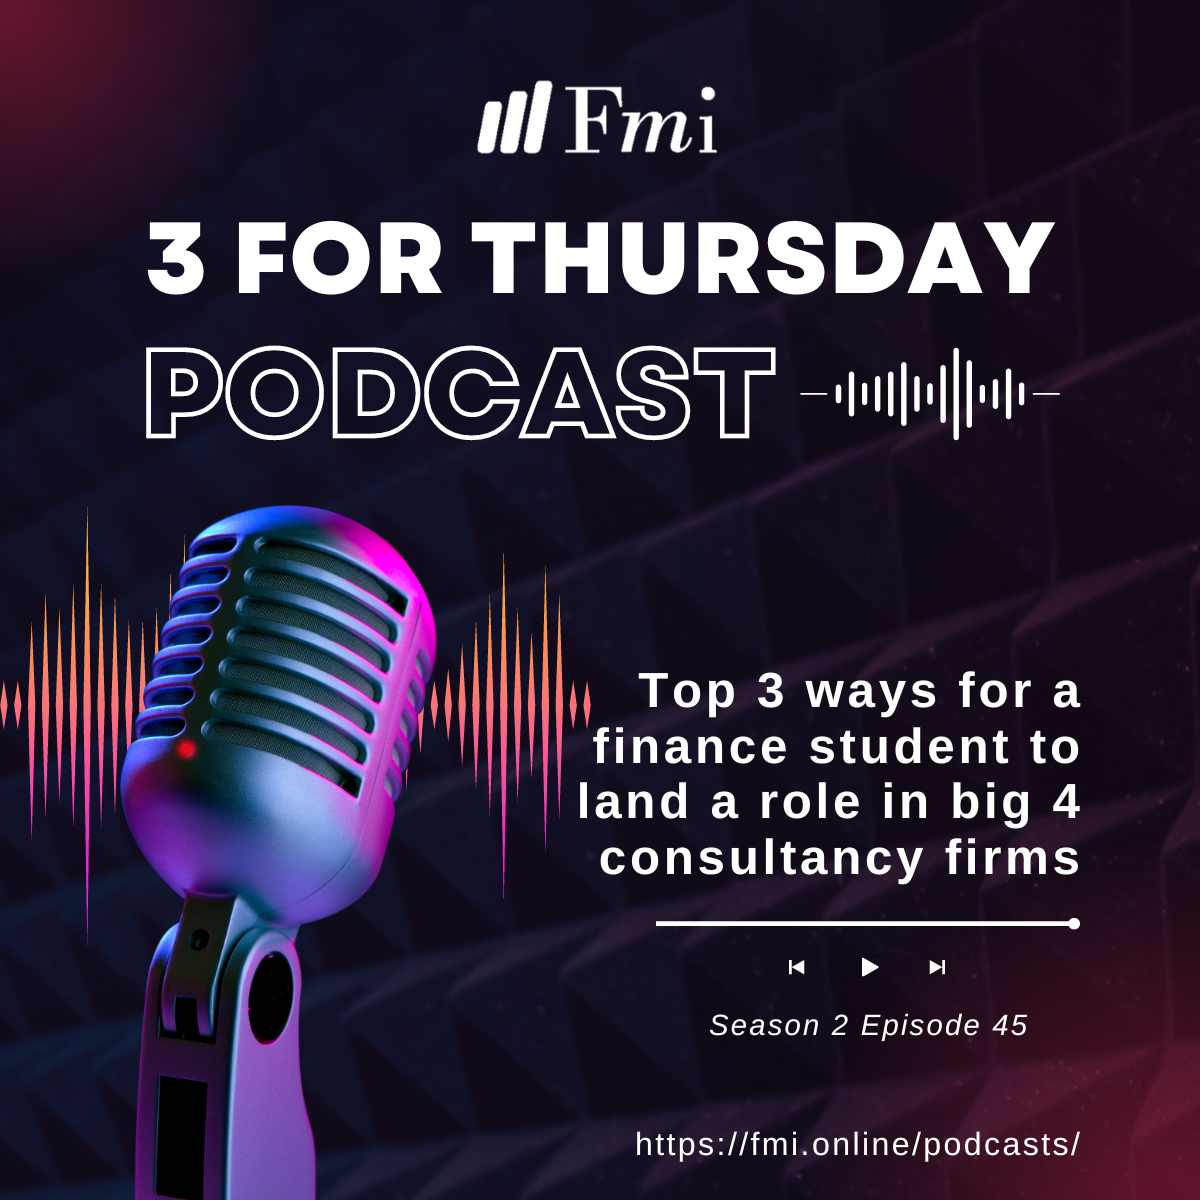 Top 3 ways for a finance student to land a role in big 4 consultancy firms